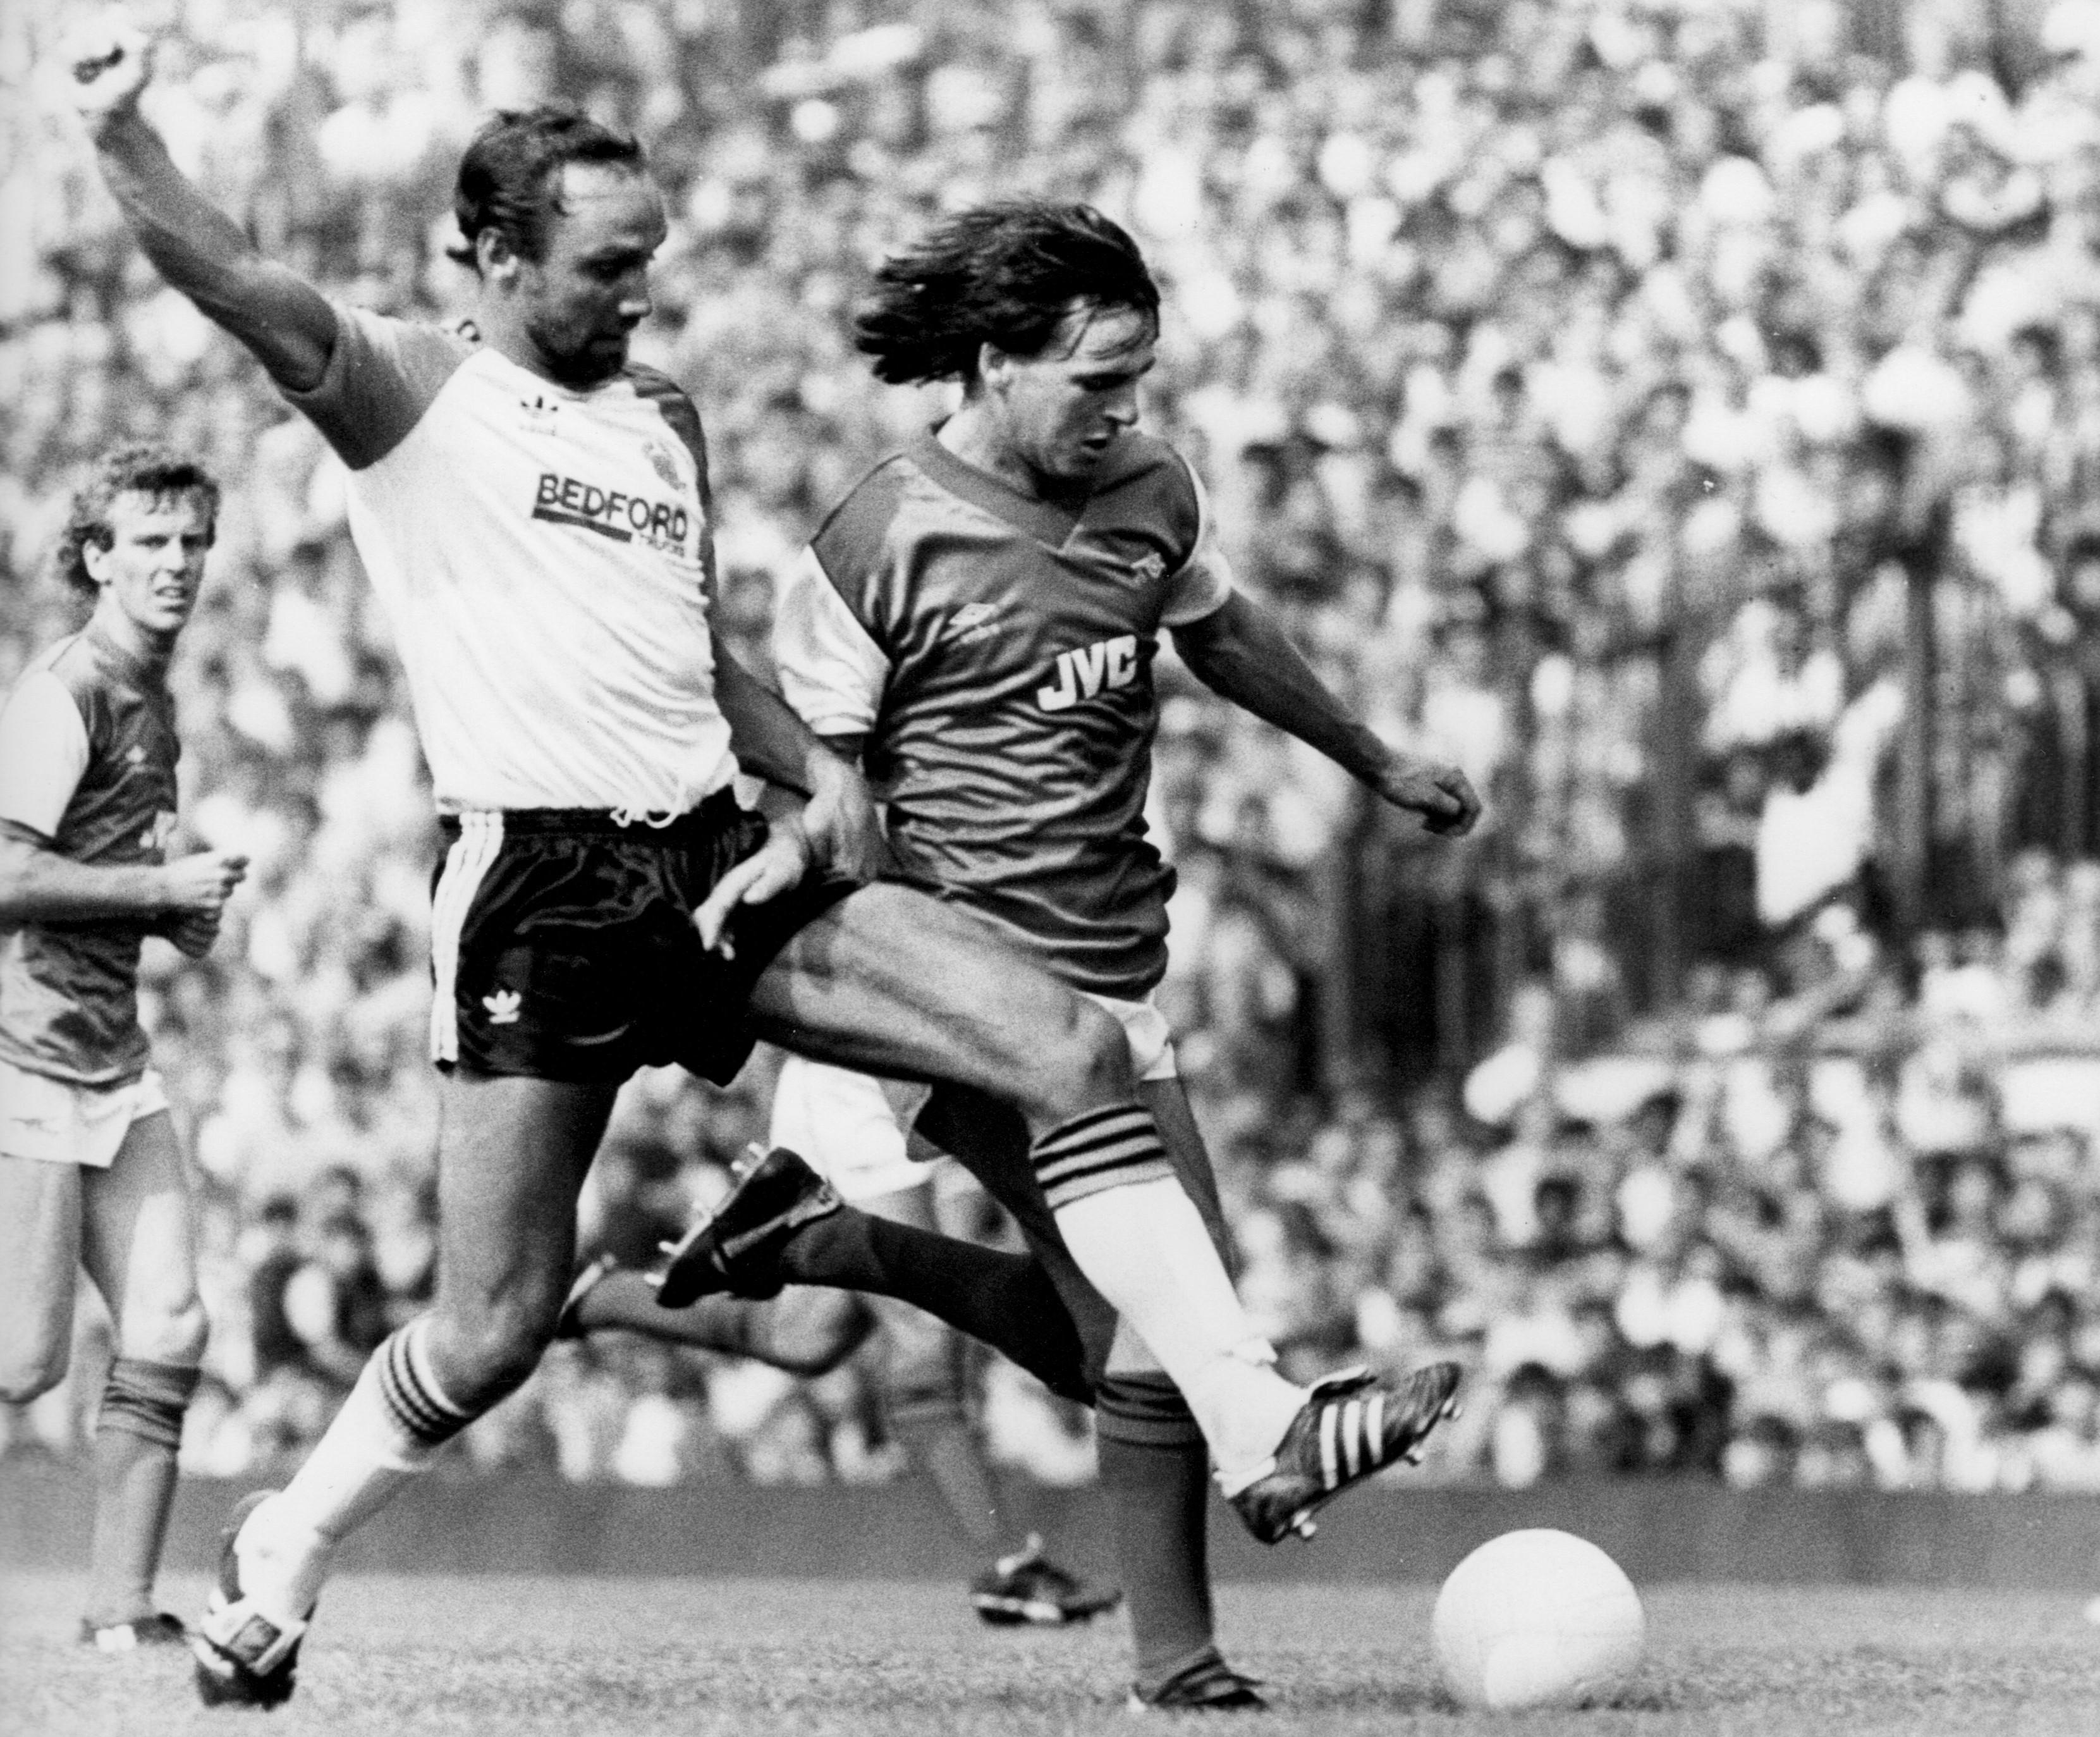 Brian Horton looks to knock the ball away from Charlie Nicholas